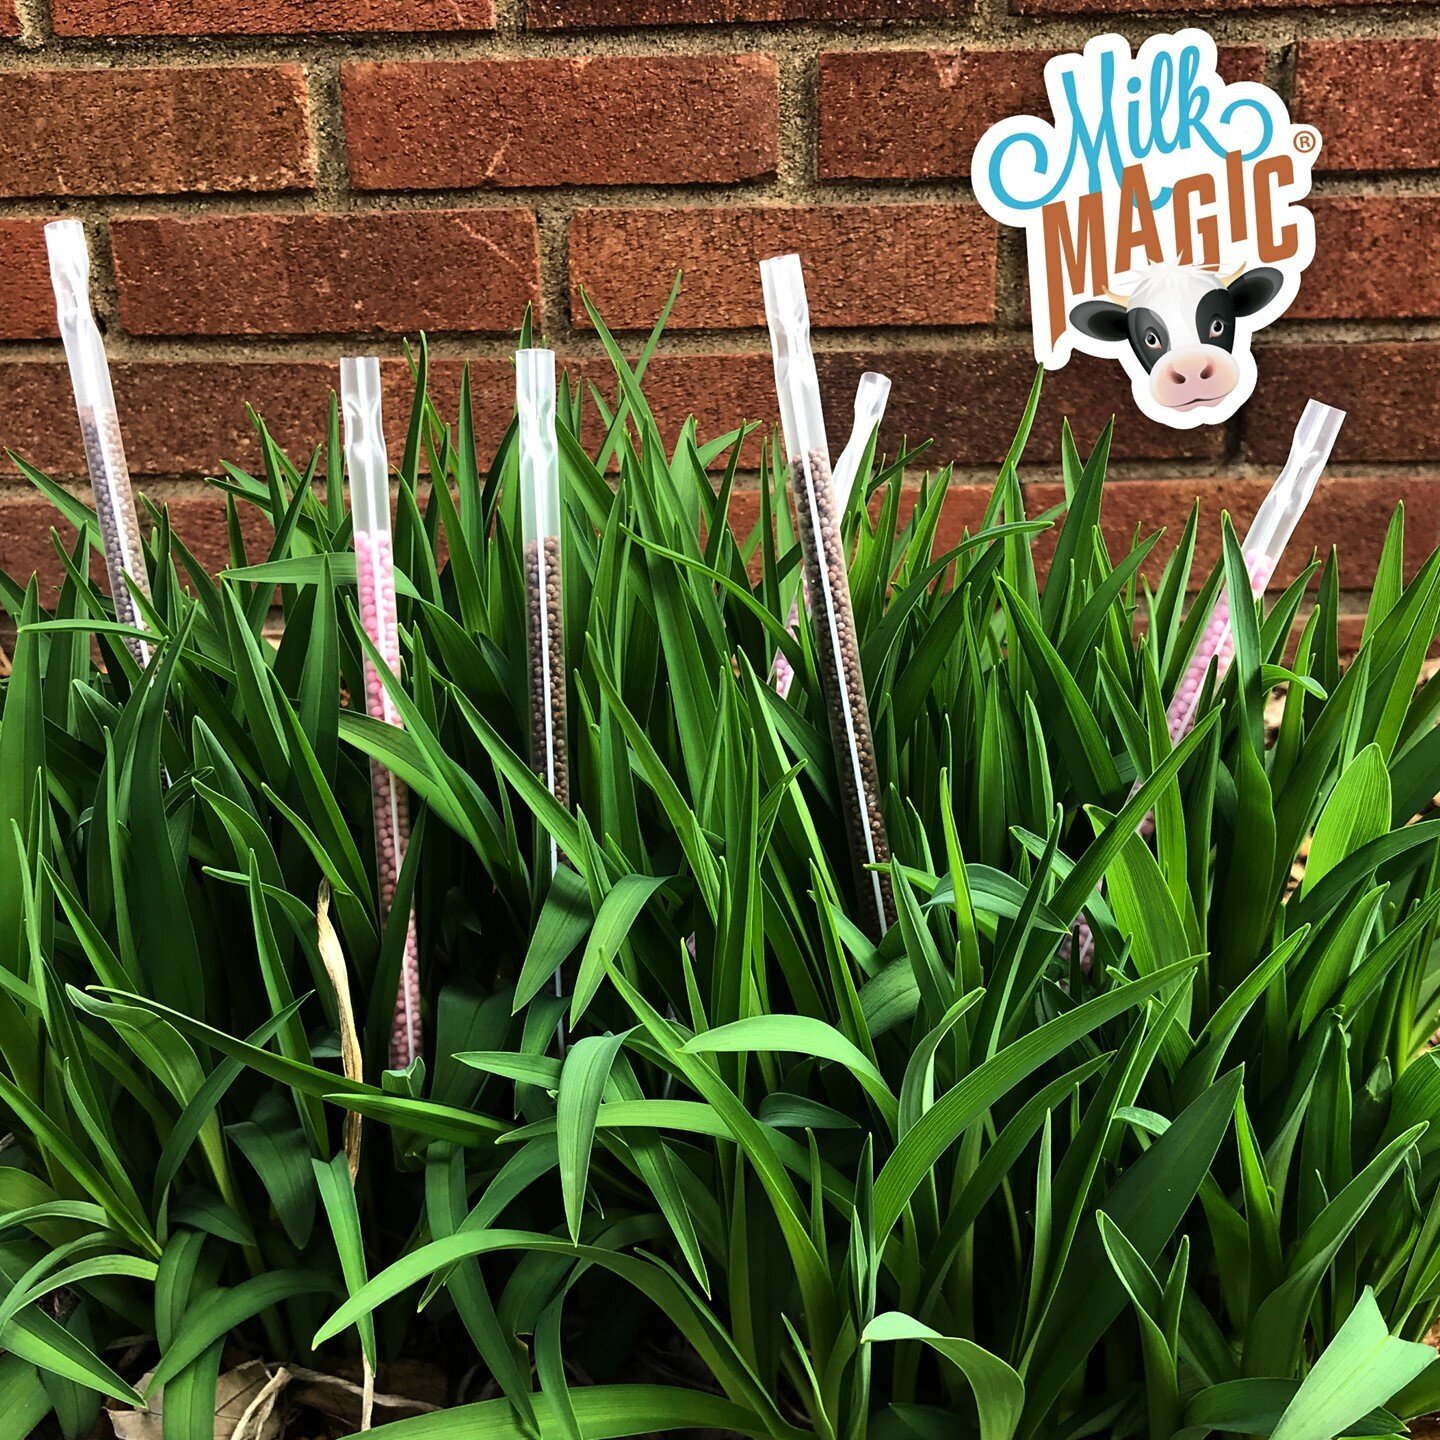 Whether you're enjoying a picnic or the smell of fresh cut grass this summer, don't forget to bring your Magic Straws along for the adventure!🌼
&bull;
&bull;
&bull;
#magicstrawsofficial #magicstraws #milkmagic #watermagic #milkmagicstraws #water #hy